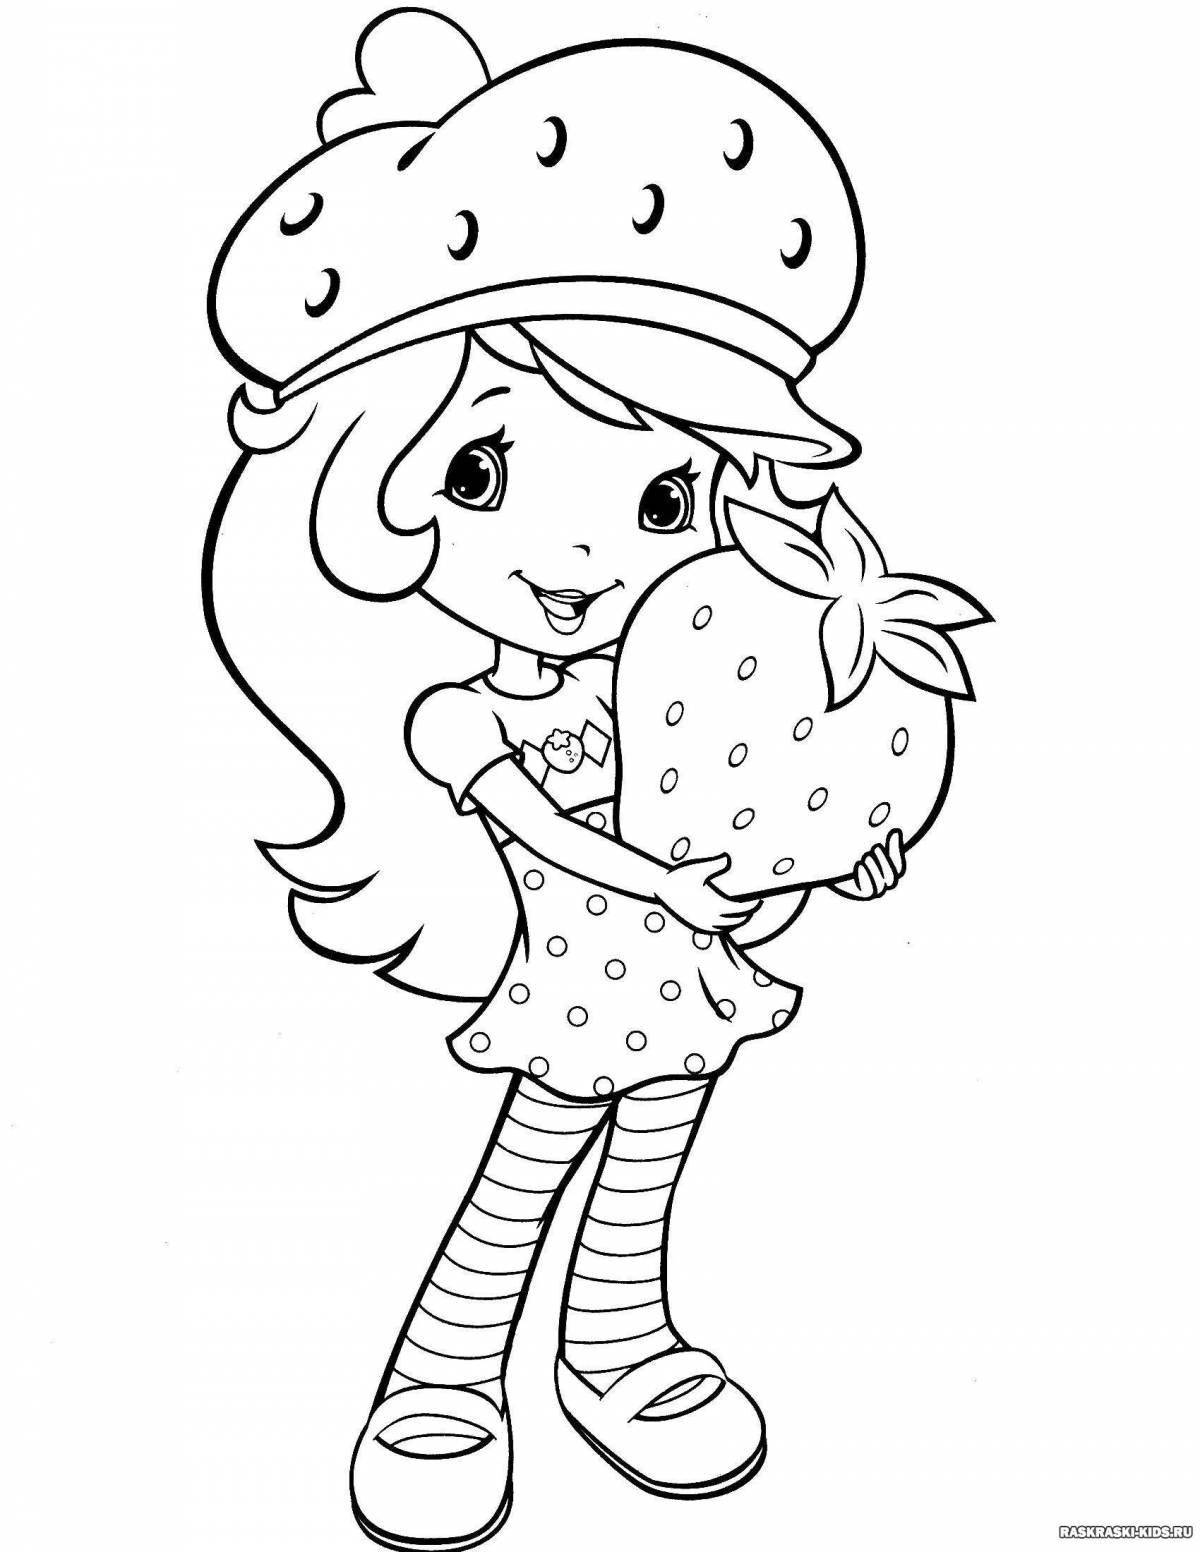 Outstanding charlotte strawberry coloring book for girls